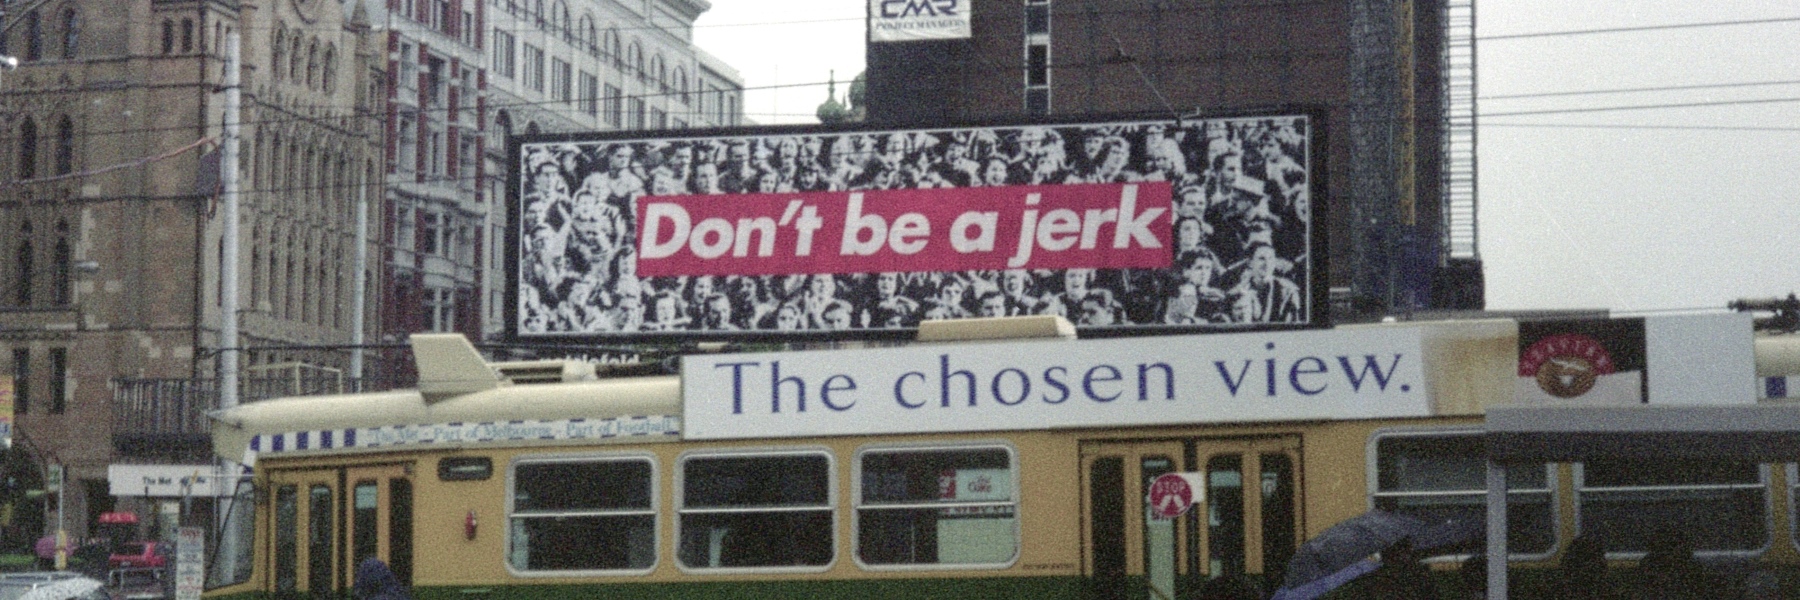 Don't be a jerk